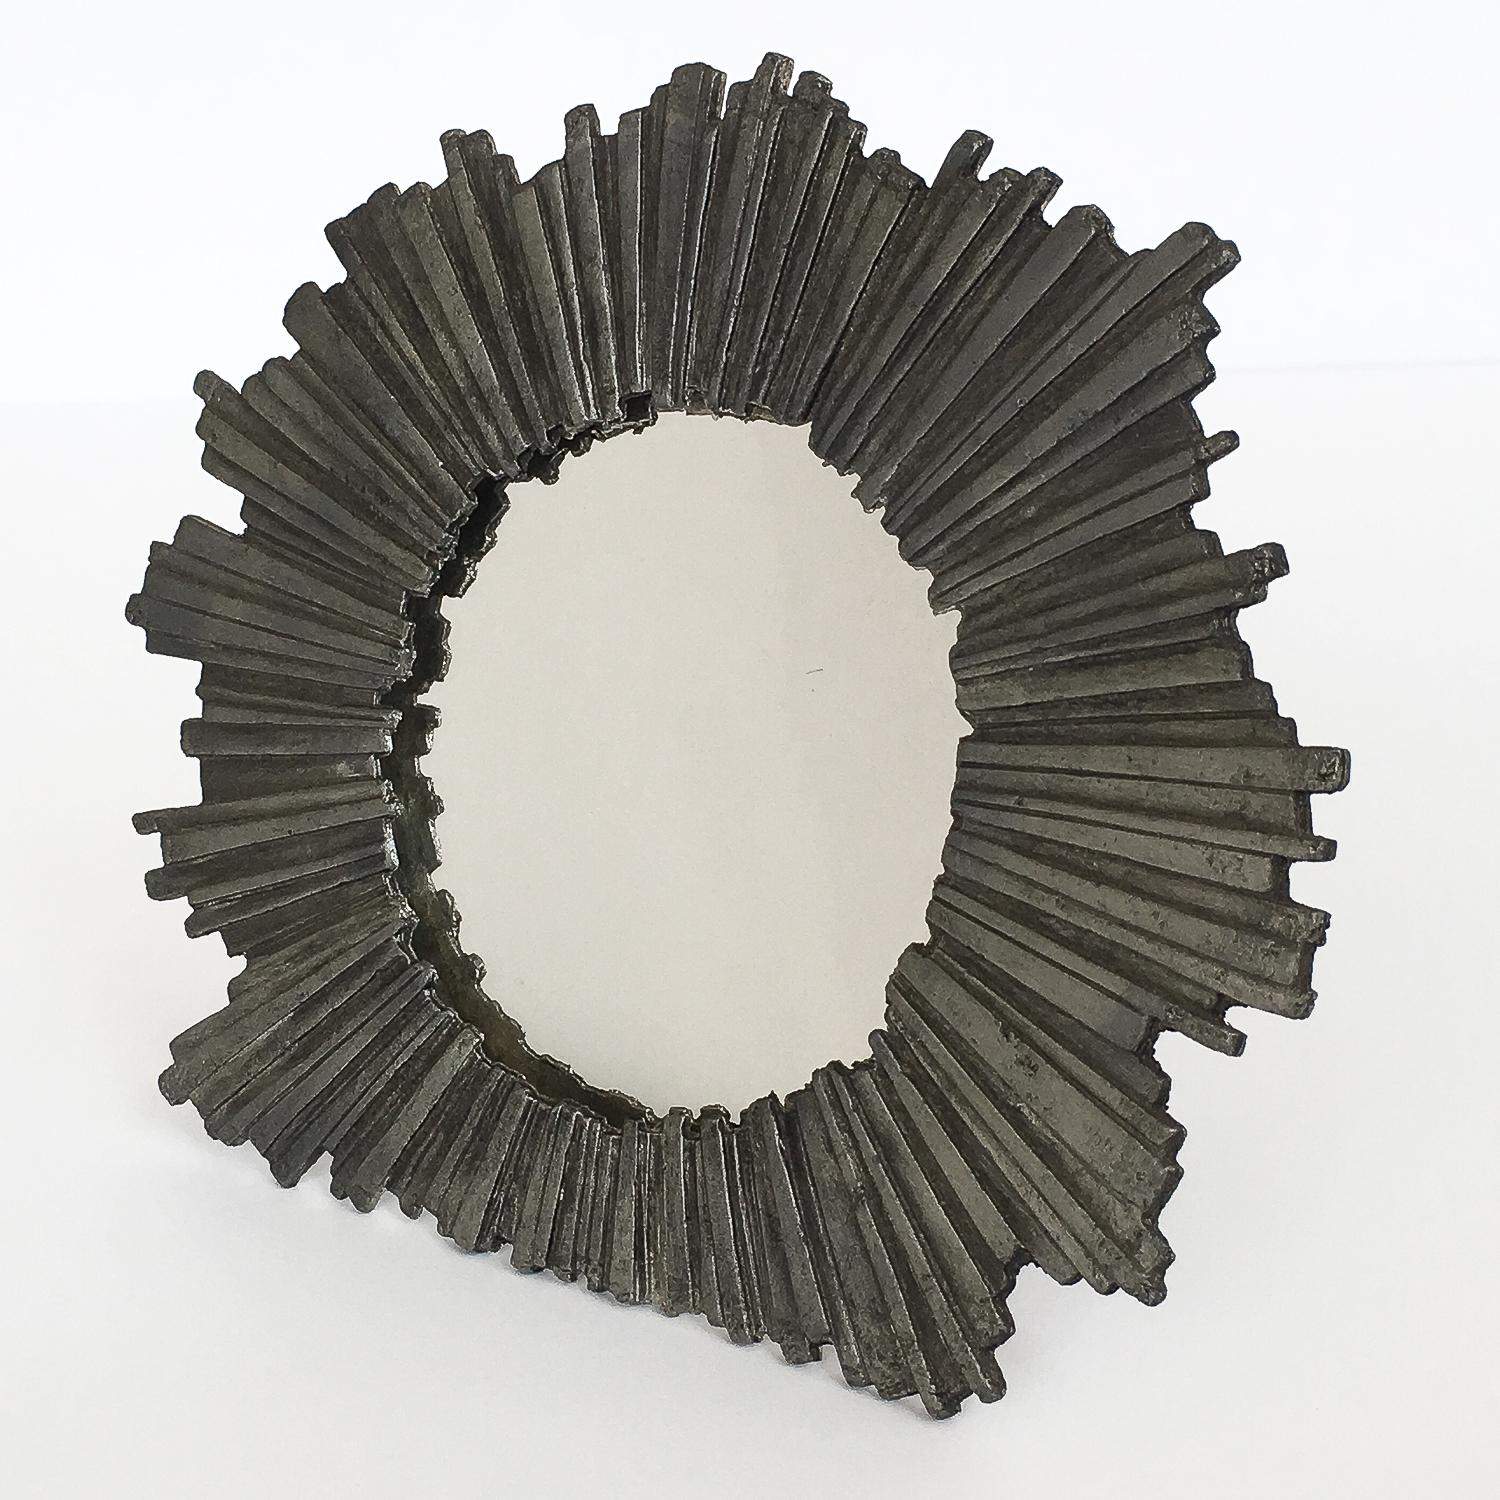 Brutalist Metzke pewter starburst framed mirror, circa 1978. Stylized solid pewter frame surrounds a small round mirror. Could also be used as a picture frame. Easel backing for table top use. The frame could also be hung on the wall using the small